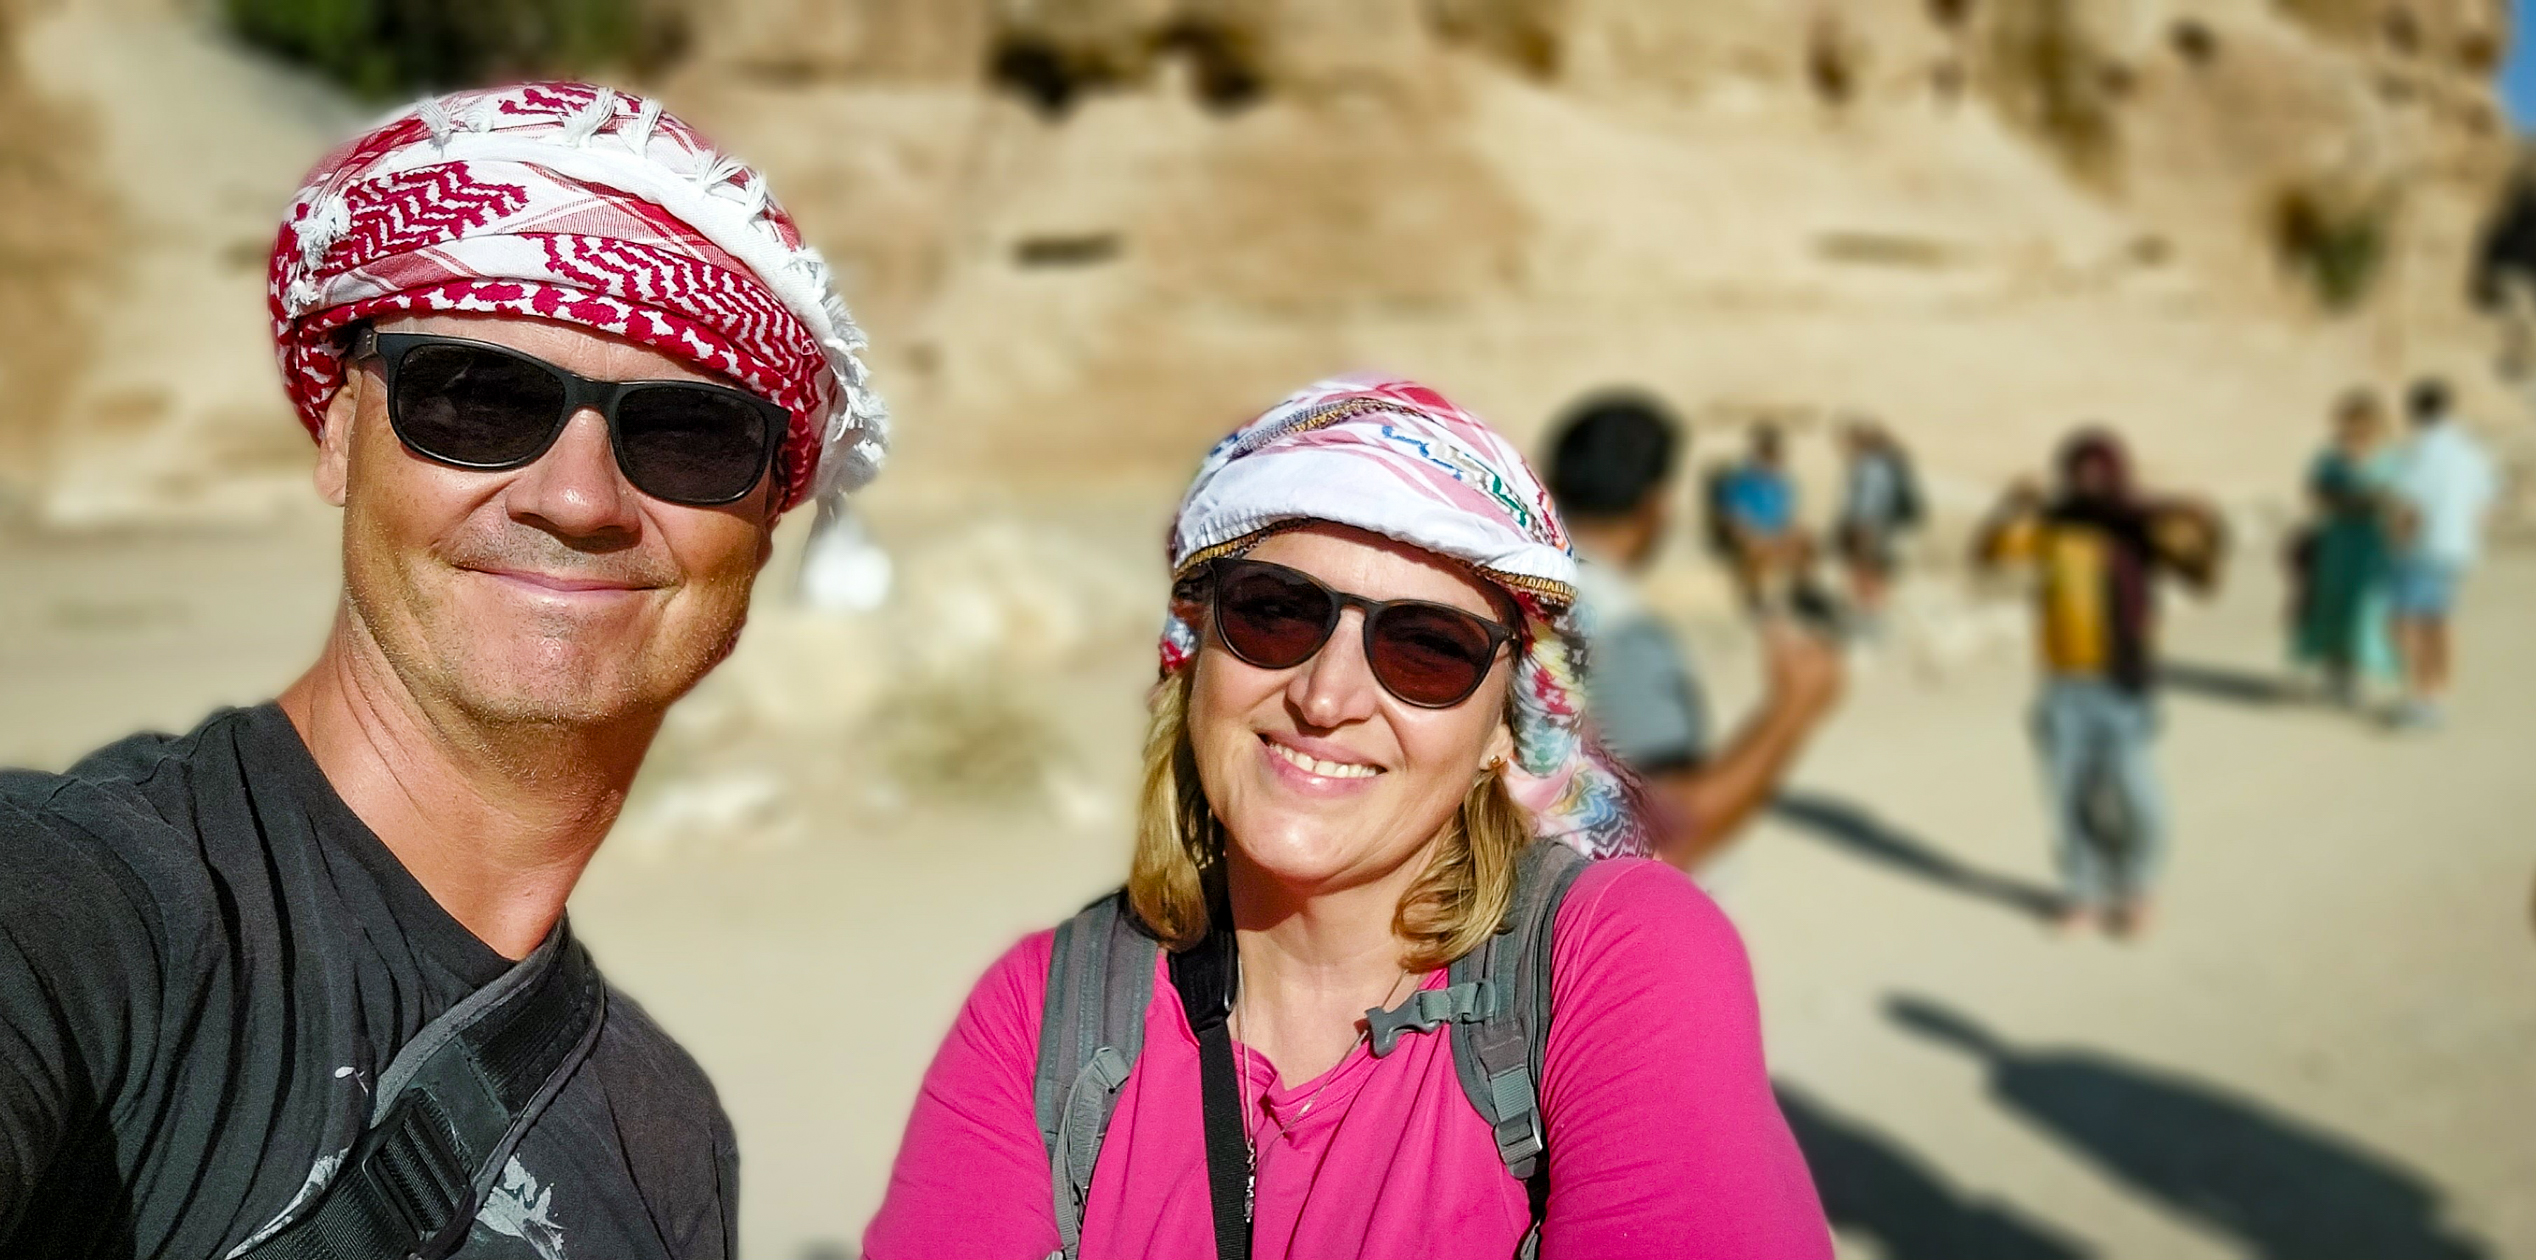 <span  class="uc_style_uc_tiles_grid_image_elementor_uc_items_attribute_title" style="color:#ffffff;">We have a good time at Petra, we liked it a lot!</span>